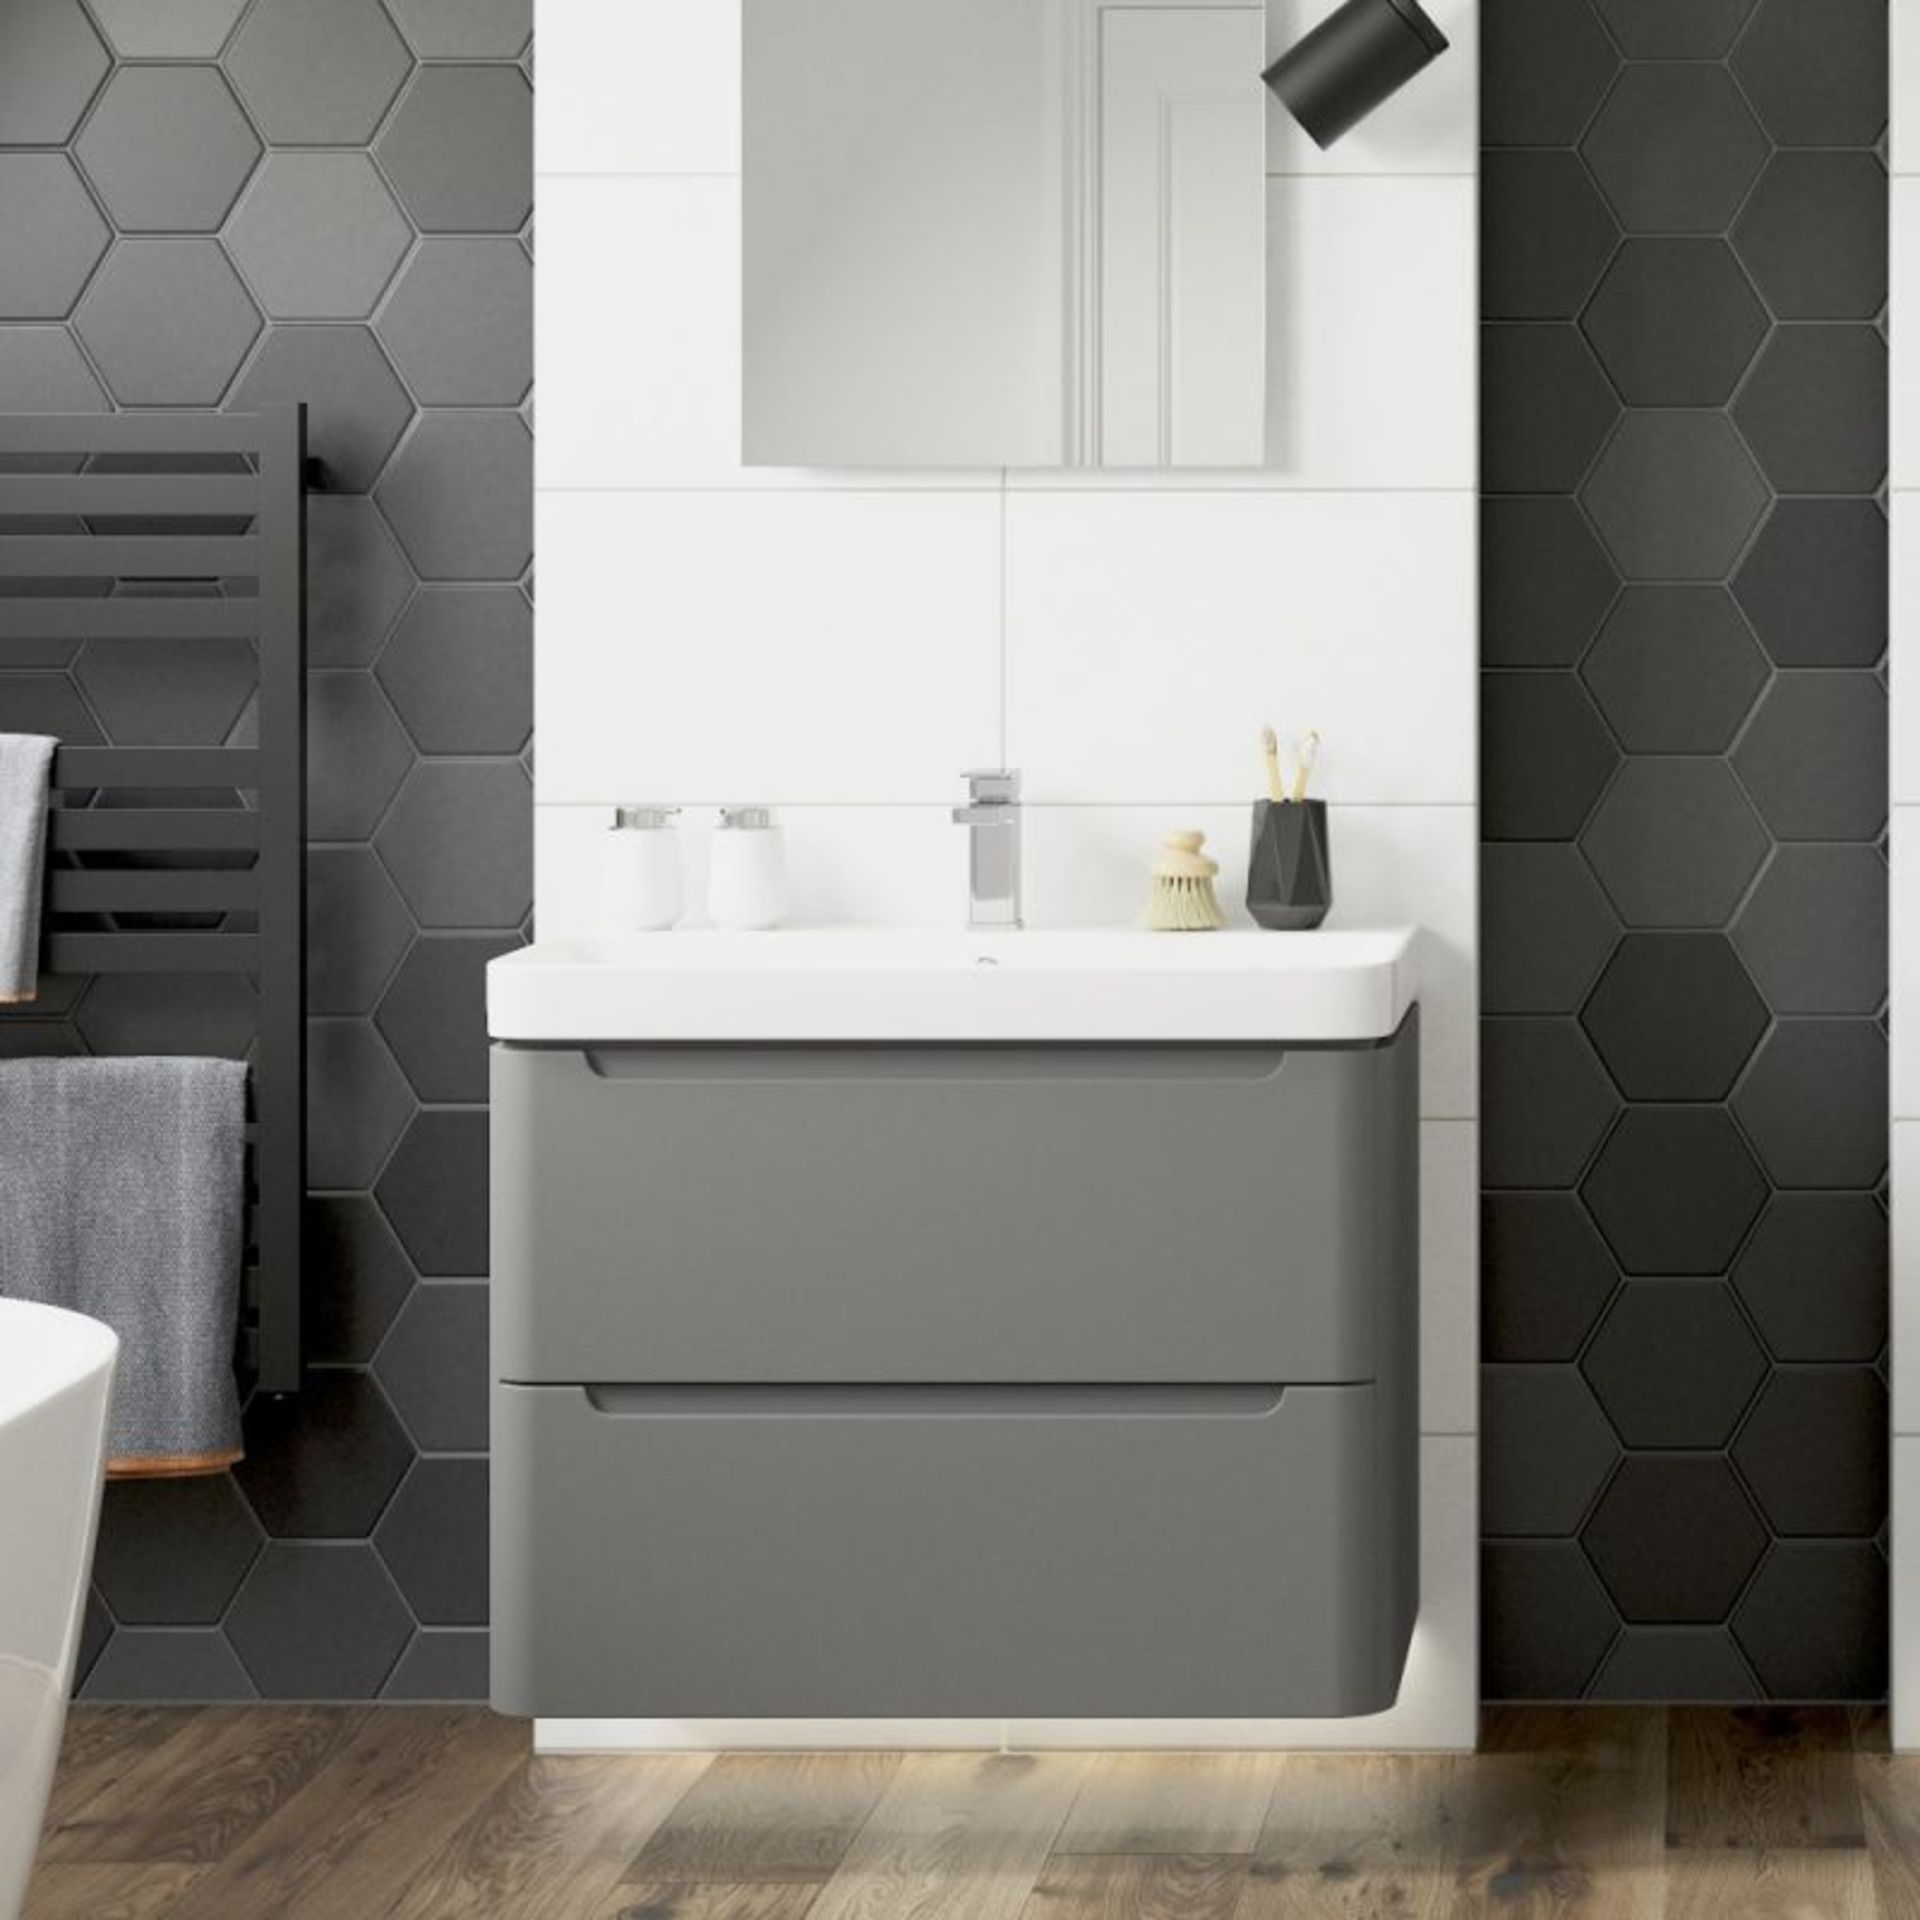 New (W21) Lambra 600 2 Drw W/Hung - Matt Dust/Gry. RRP £545.00. Comes Complete With Basin. The...